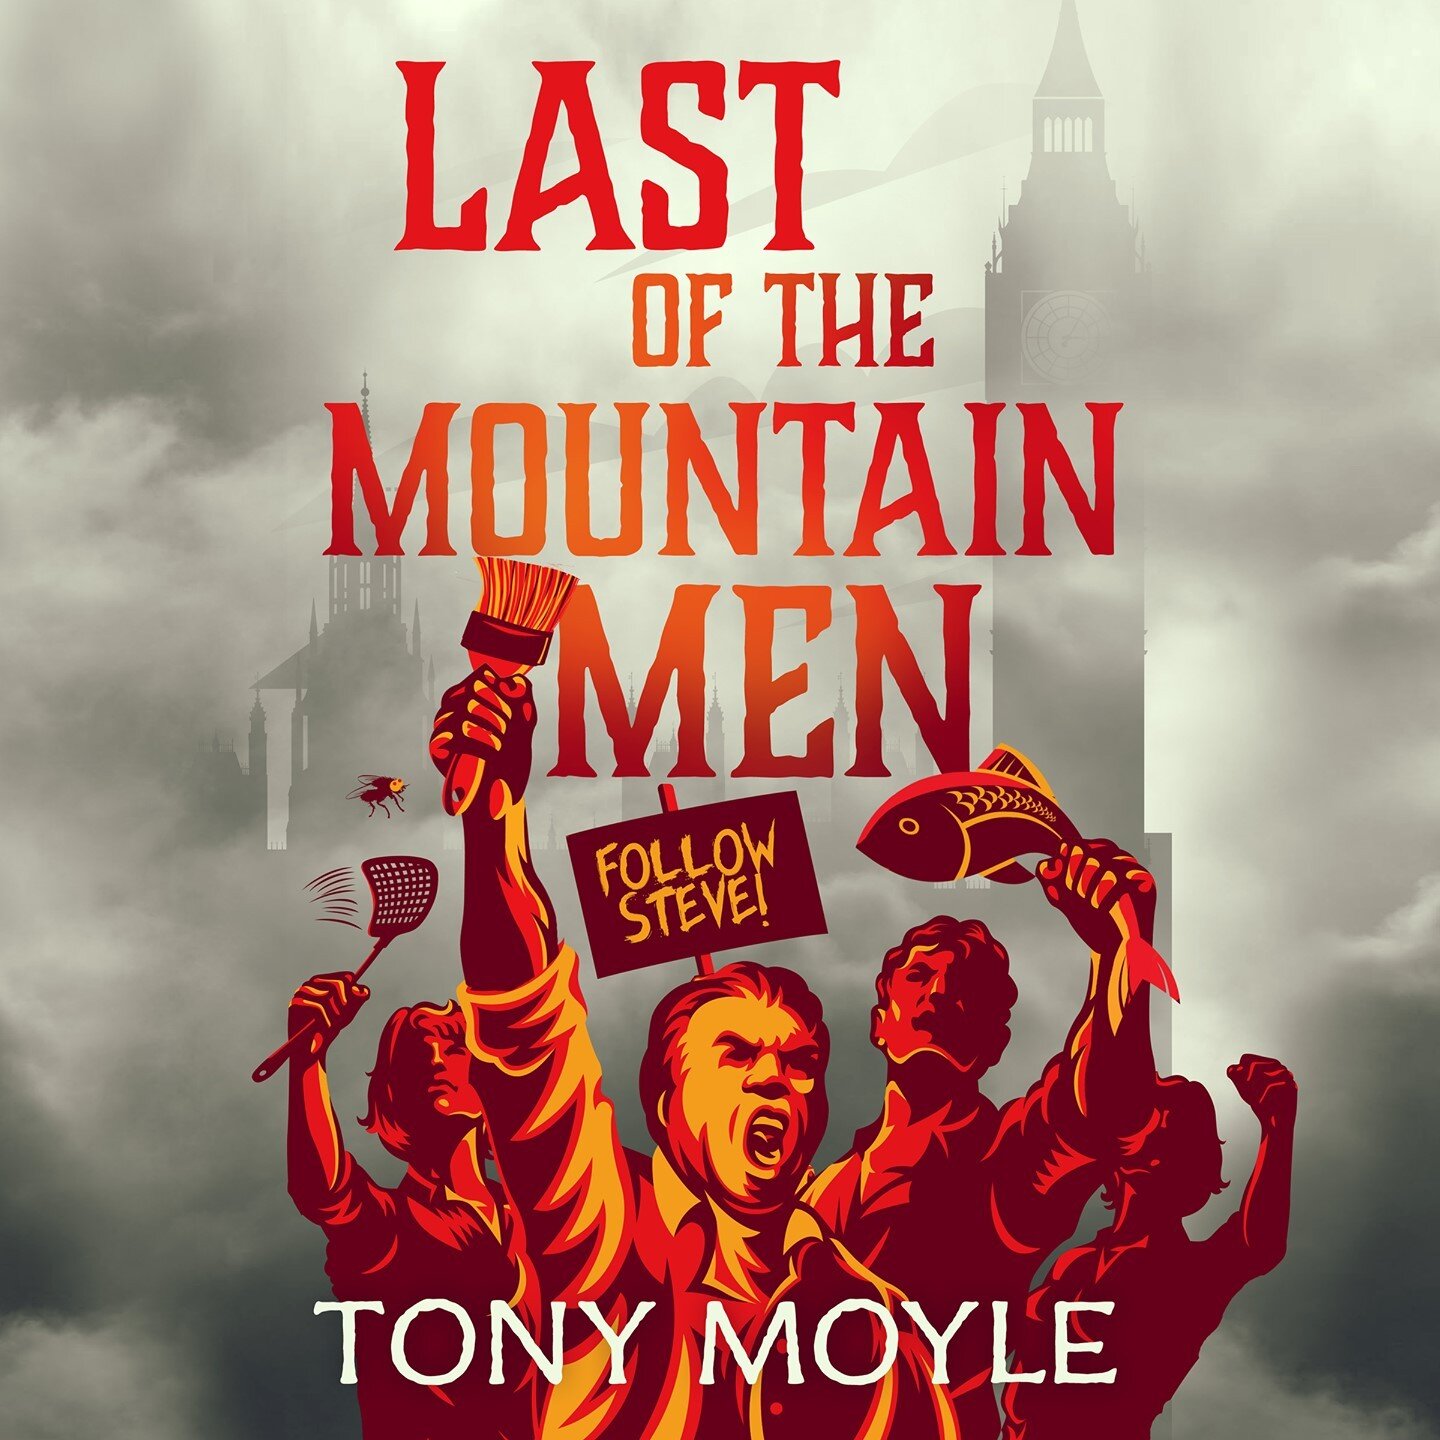 Discounted Book of the Month - Last of the Mountain Men. &pound;1.99/$2.99